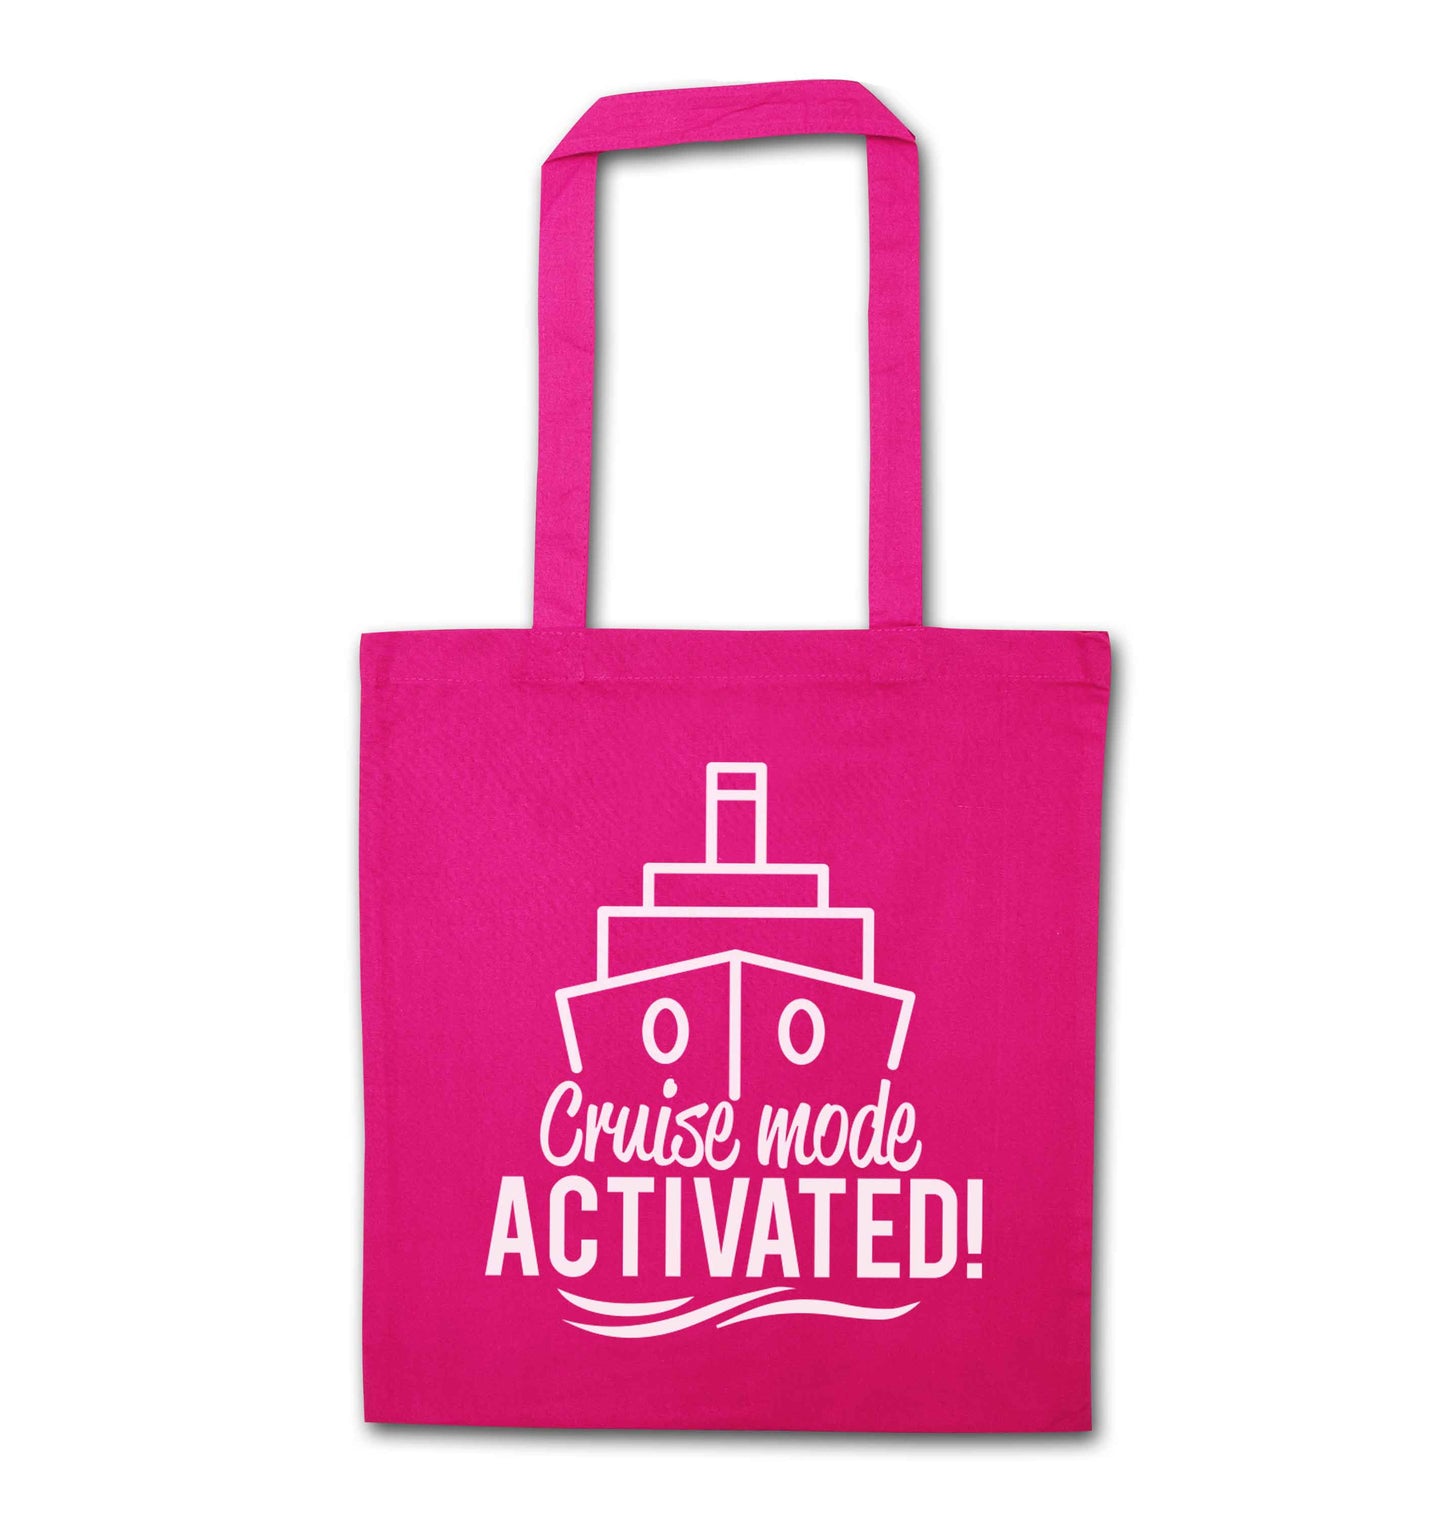 Cruise mode activated pink tote bag